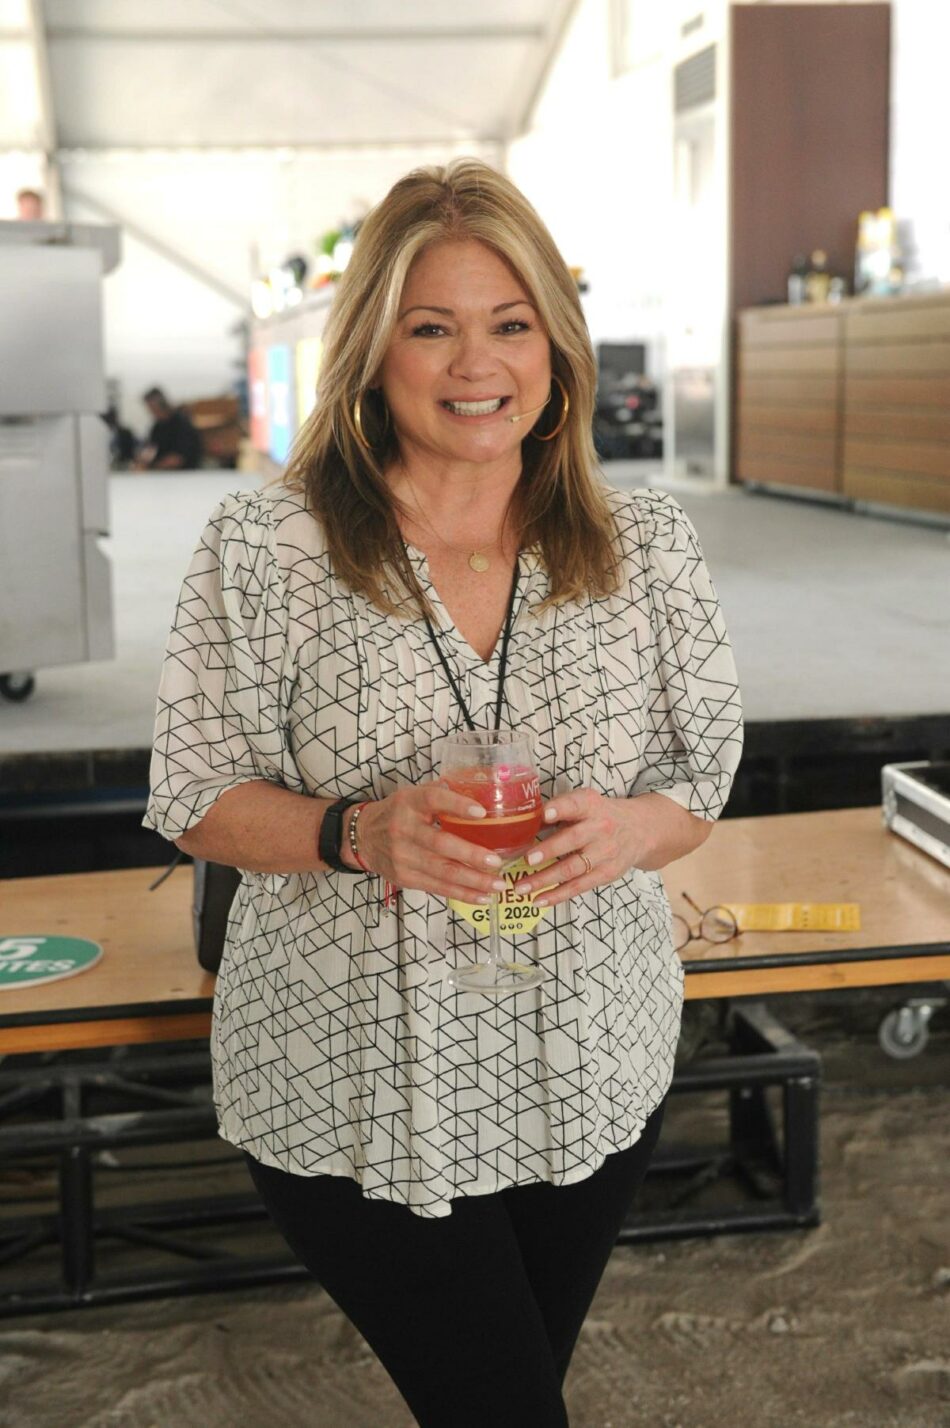 Valerie Bertinelli’s cooking show cancelled after 14 seasons